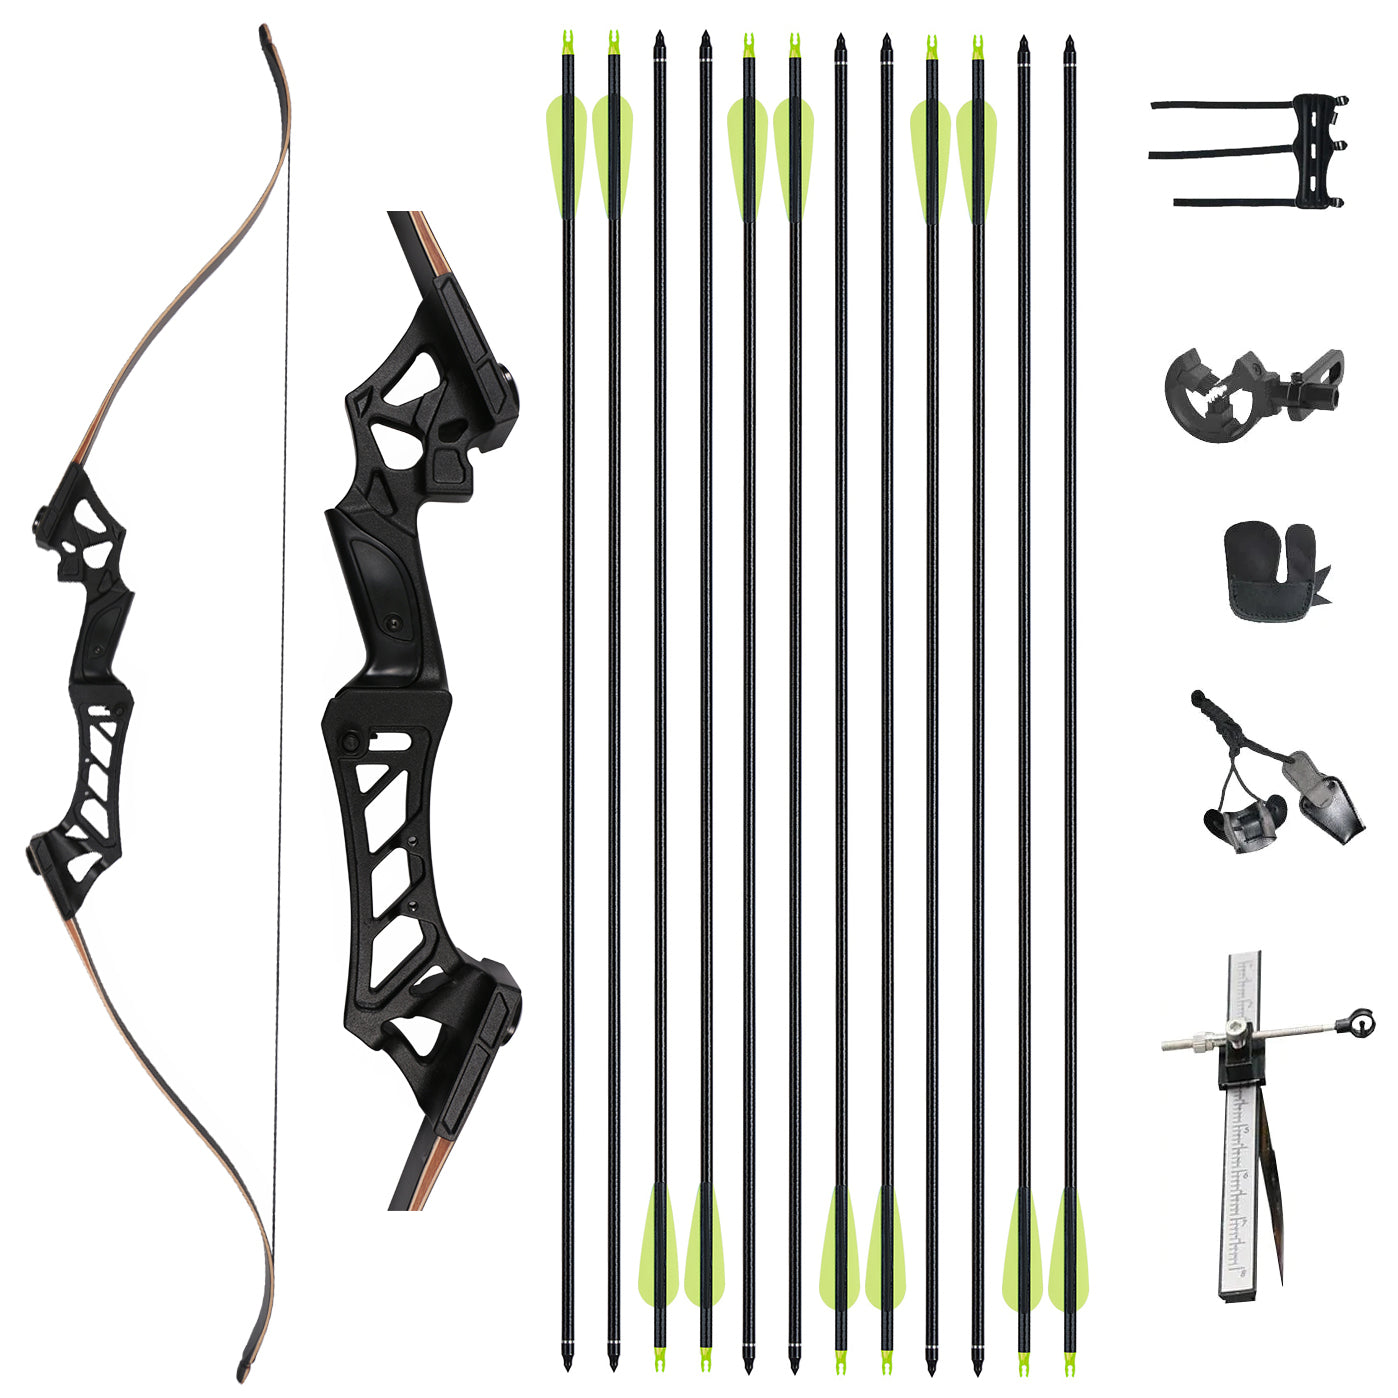 60" 30lbs Takedown Recurve Bow Arrow Set Practice Hunting Shooting Outdoor Aluminum Alloy Riser for Adults